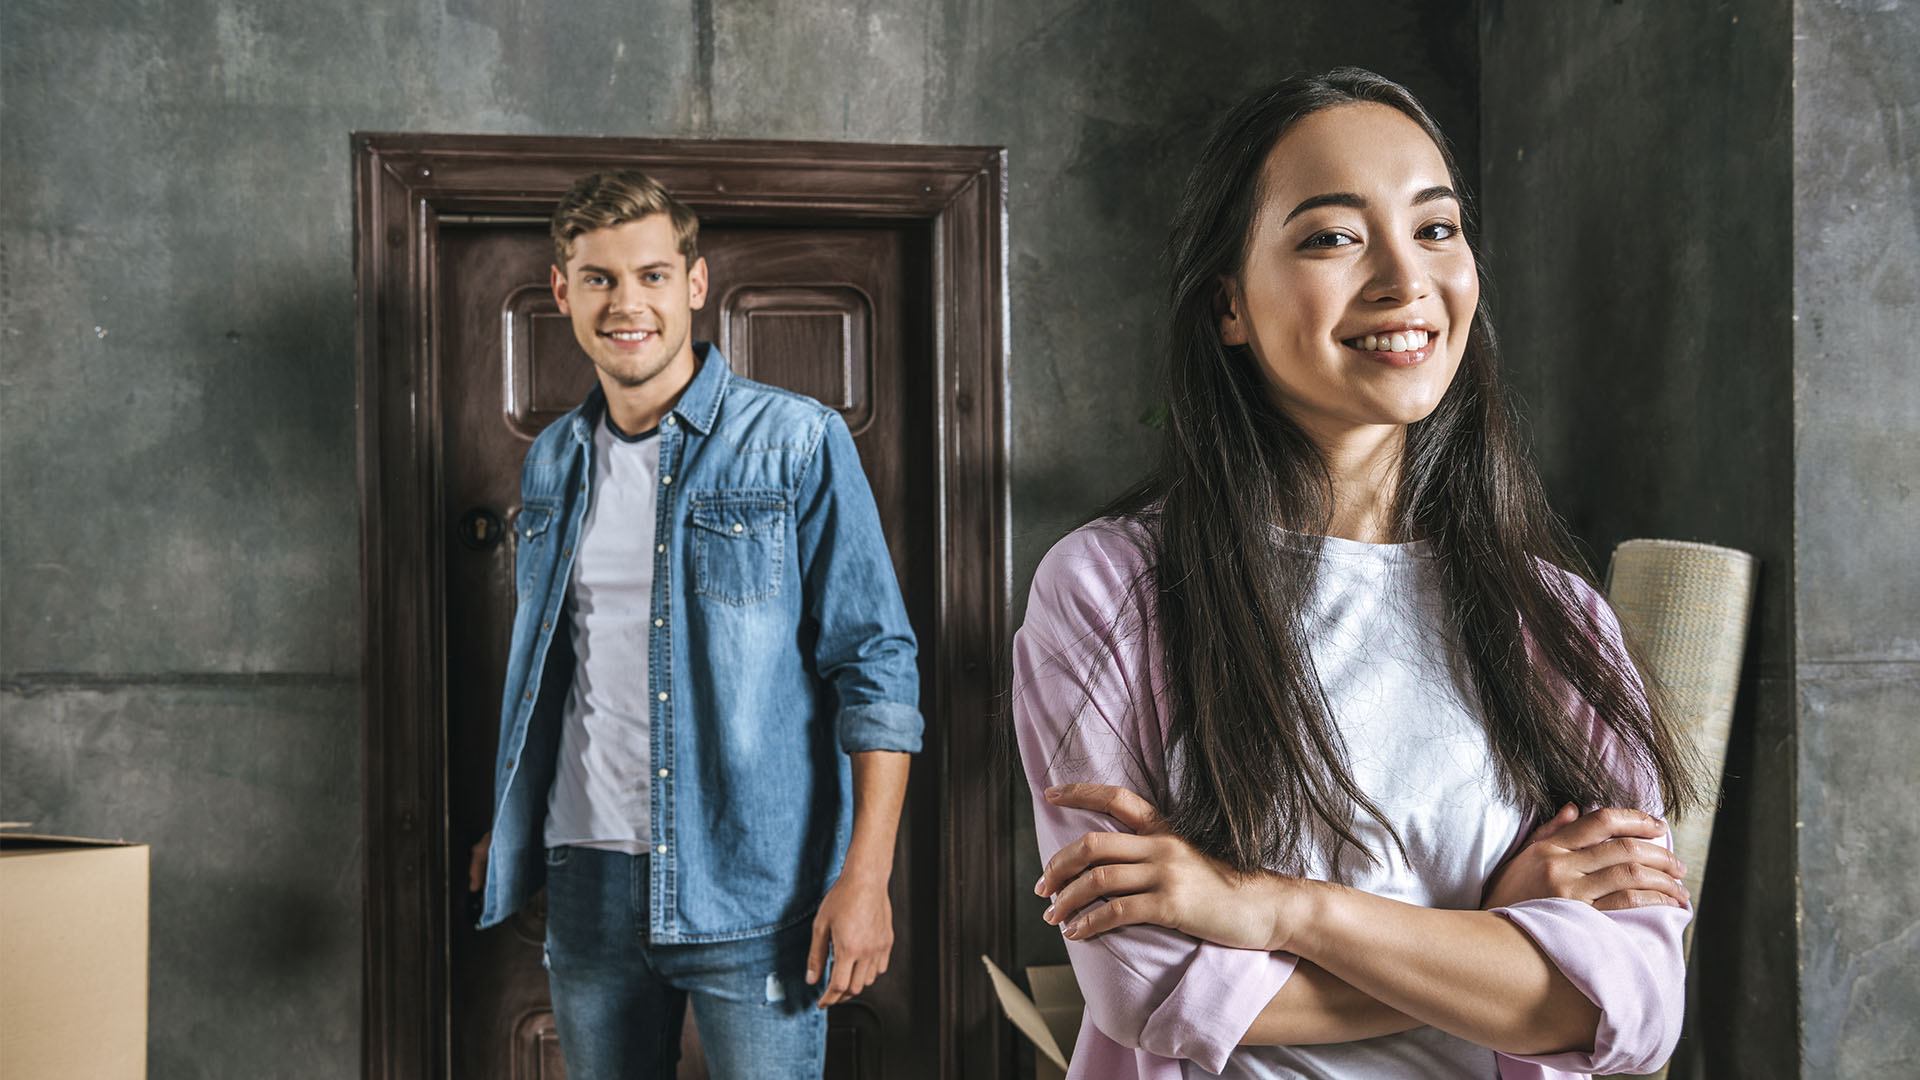 A woman with crossed arms smiles in the foreground while a man stands in the background near a door, both casually dressed in a room with gray walls. Is renting ruining your future? They seem to have found a comfortable balance.